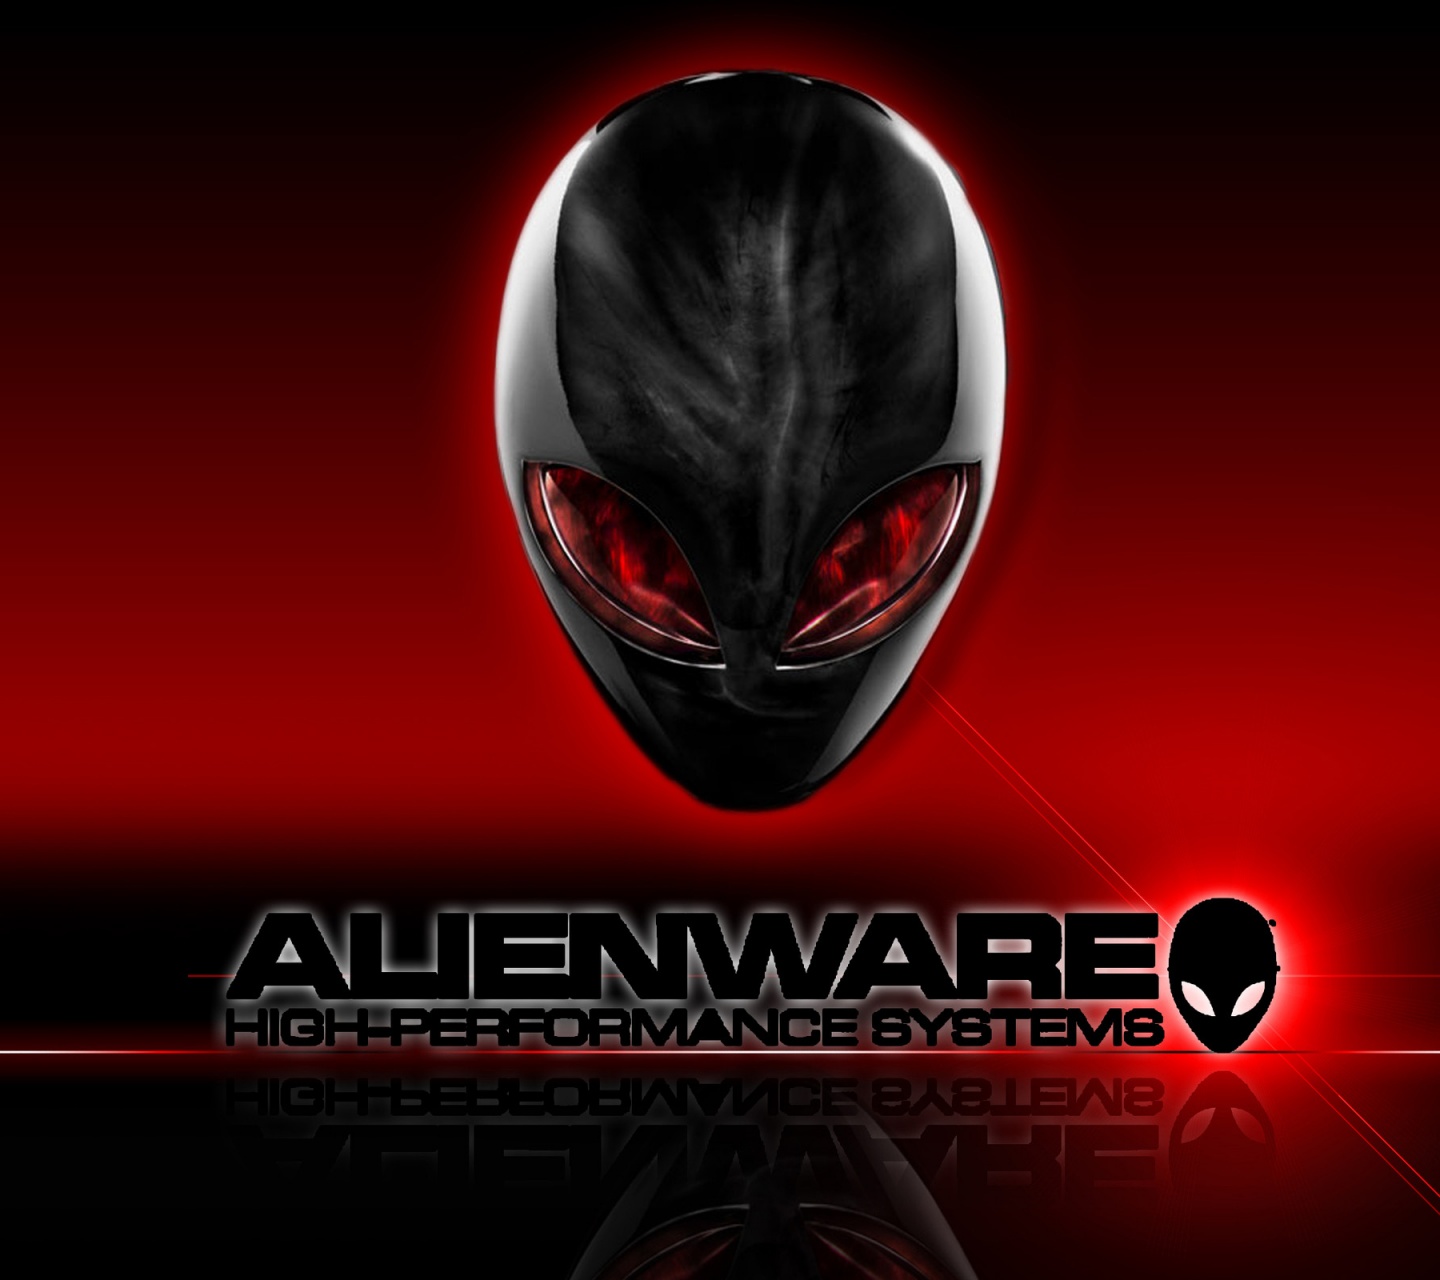 Alienware Computer Red And Black